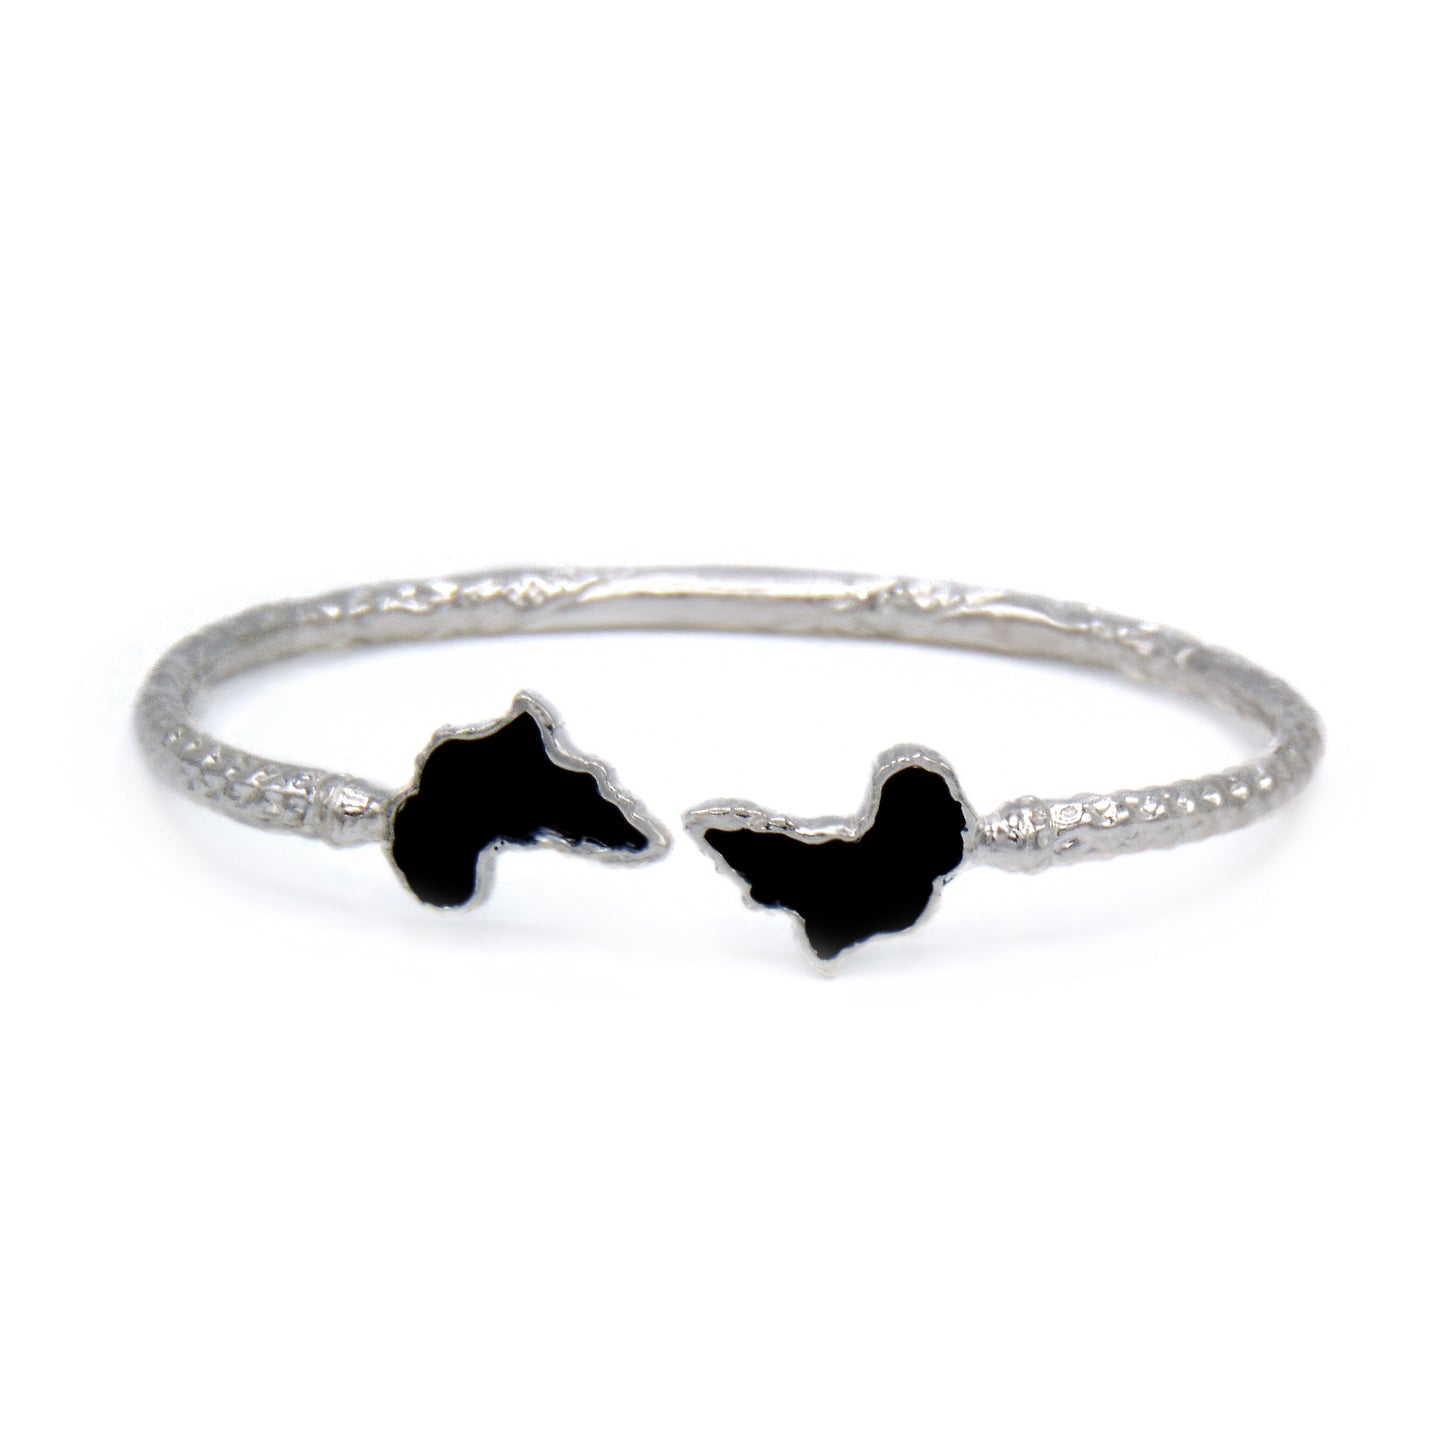 Africa Ends .925 Sterling Silver West Indian Bangle w. Black Enamel (Made in USA) - Betterjewelry